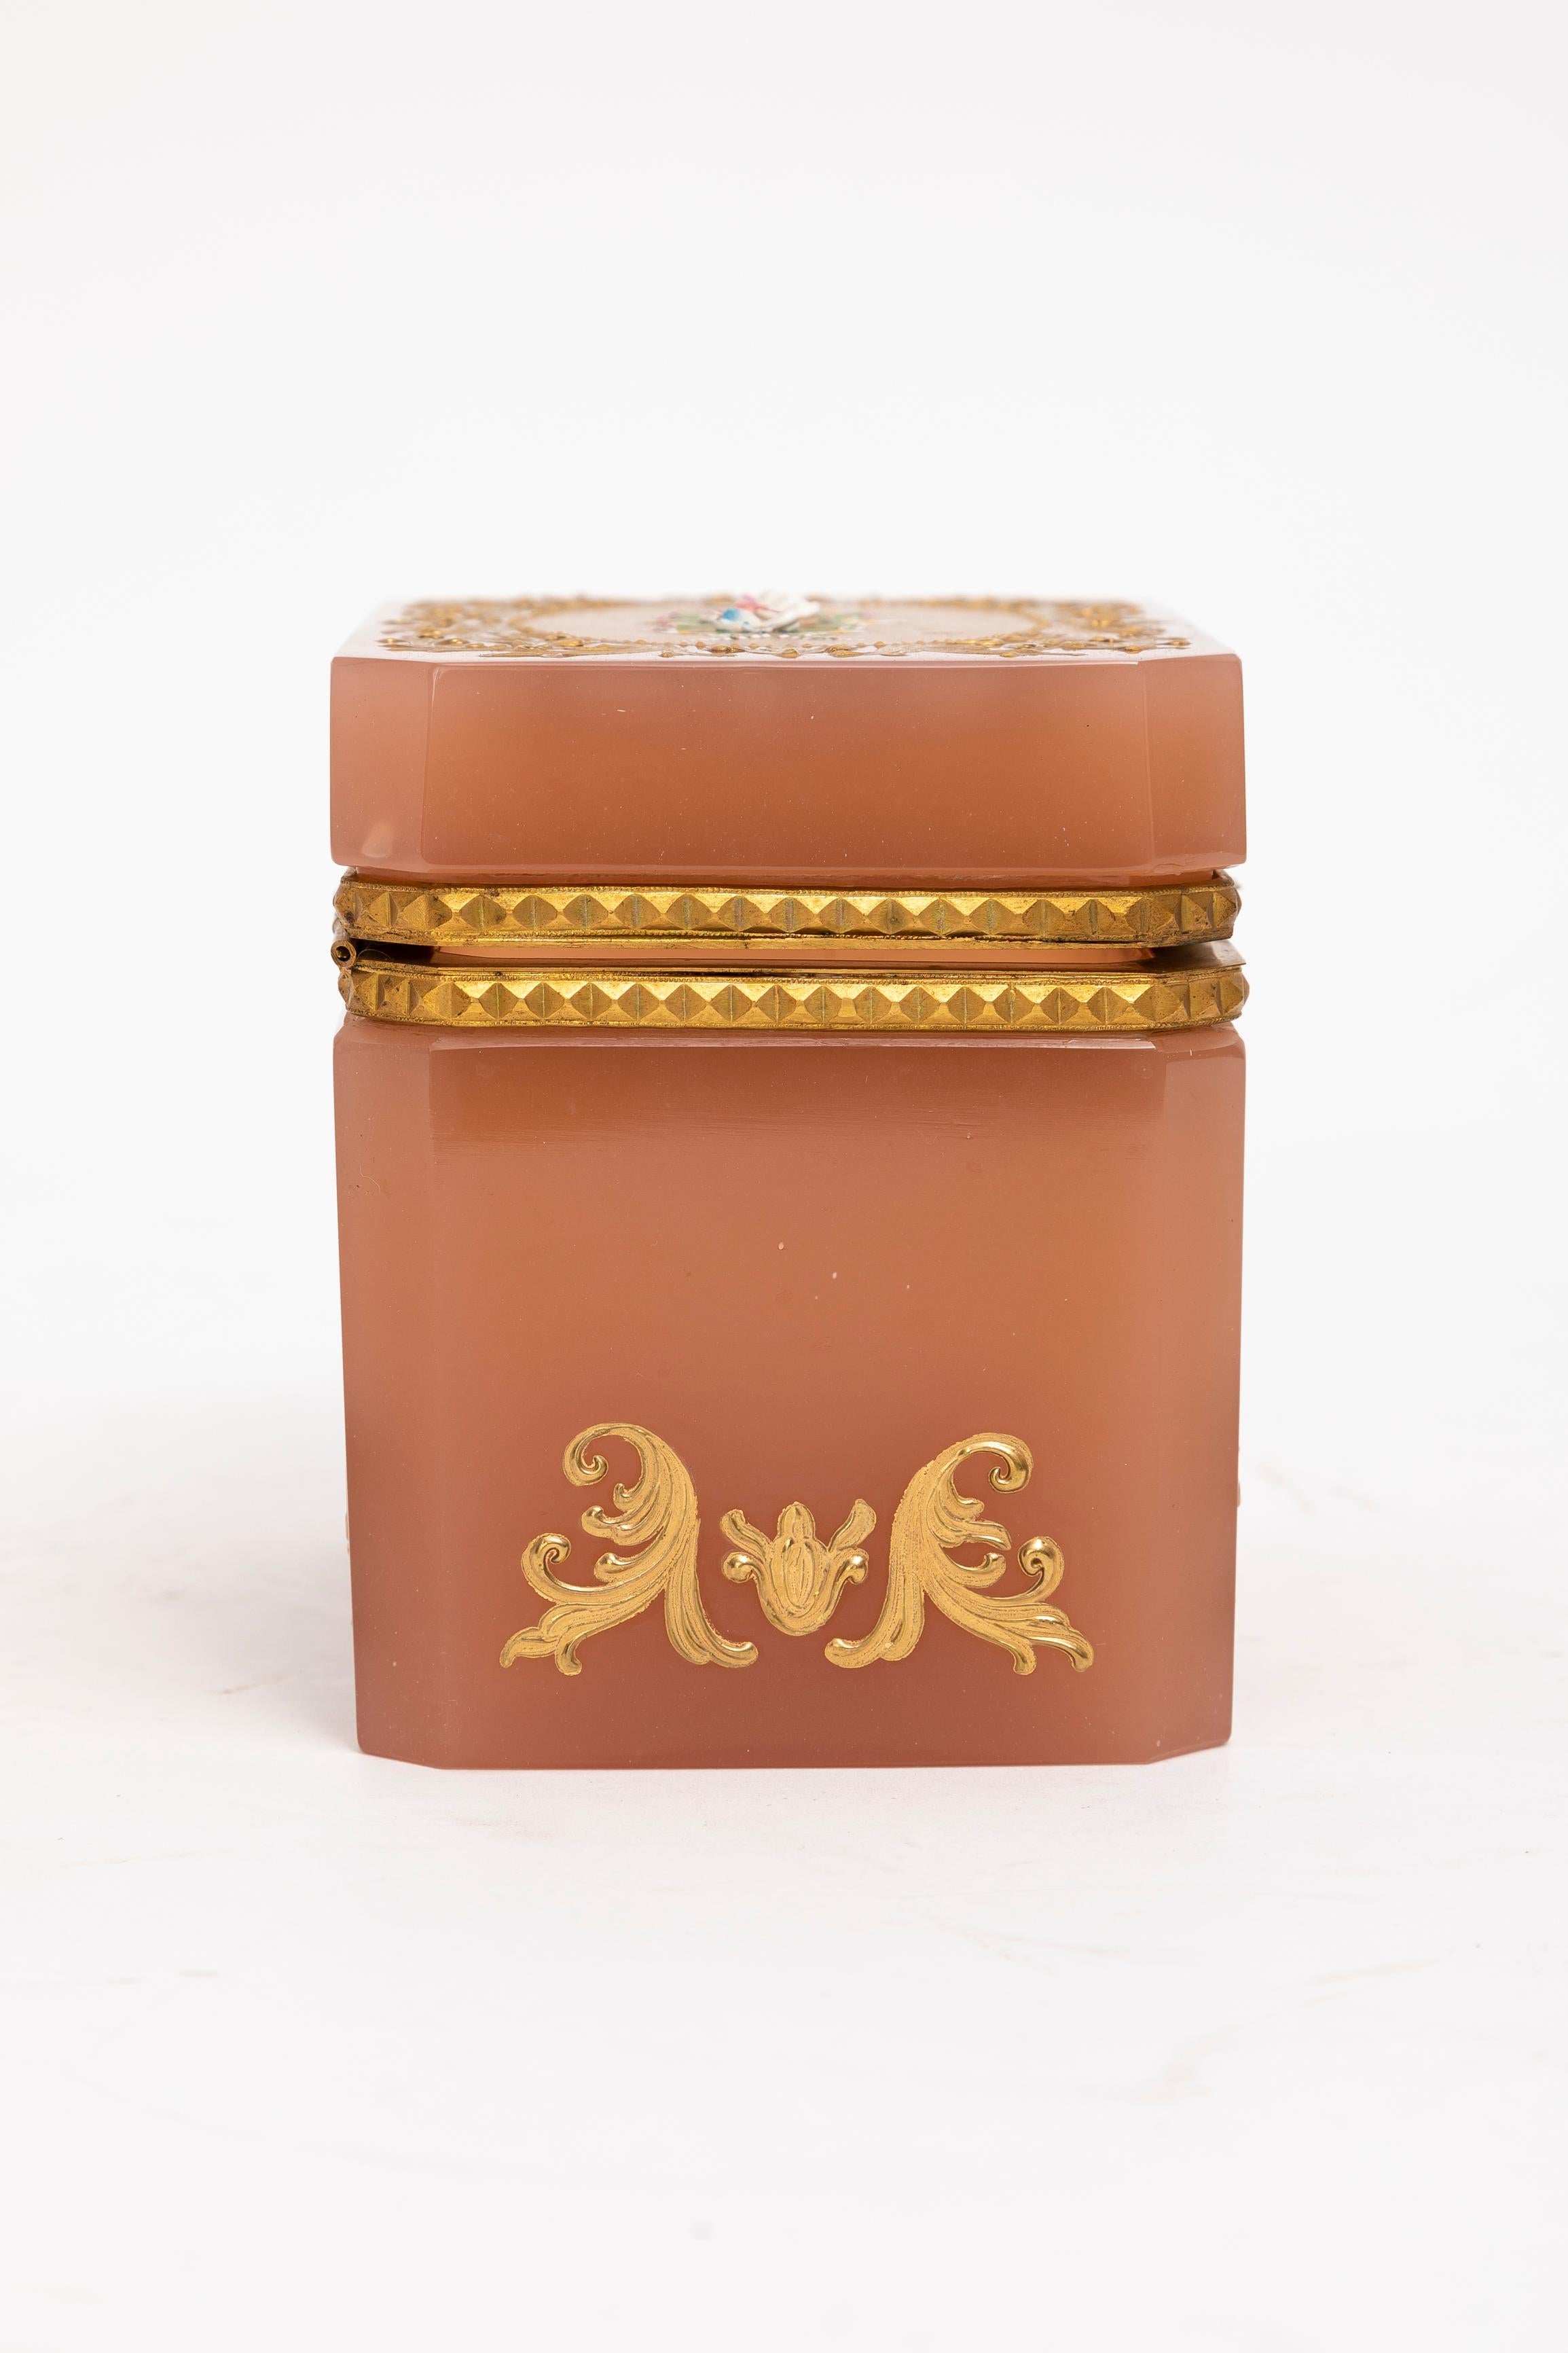 Early 20th Century An Unusual Peach Opaline Dore Bronze Hinged Box by Moser w/ Raised Gold, Moser